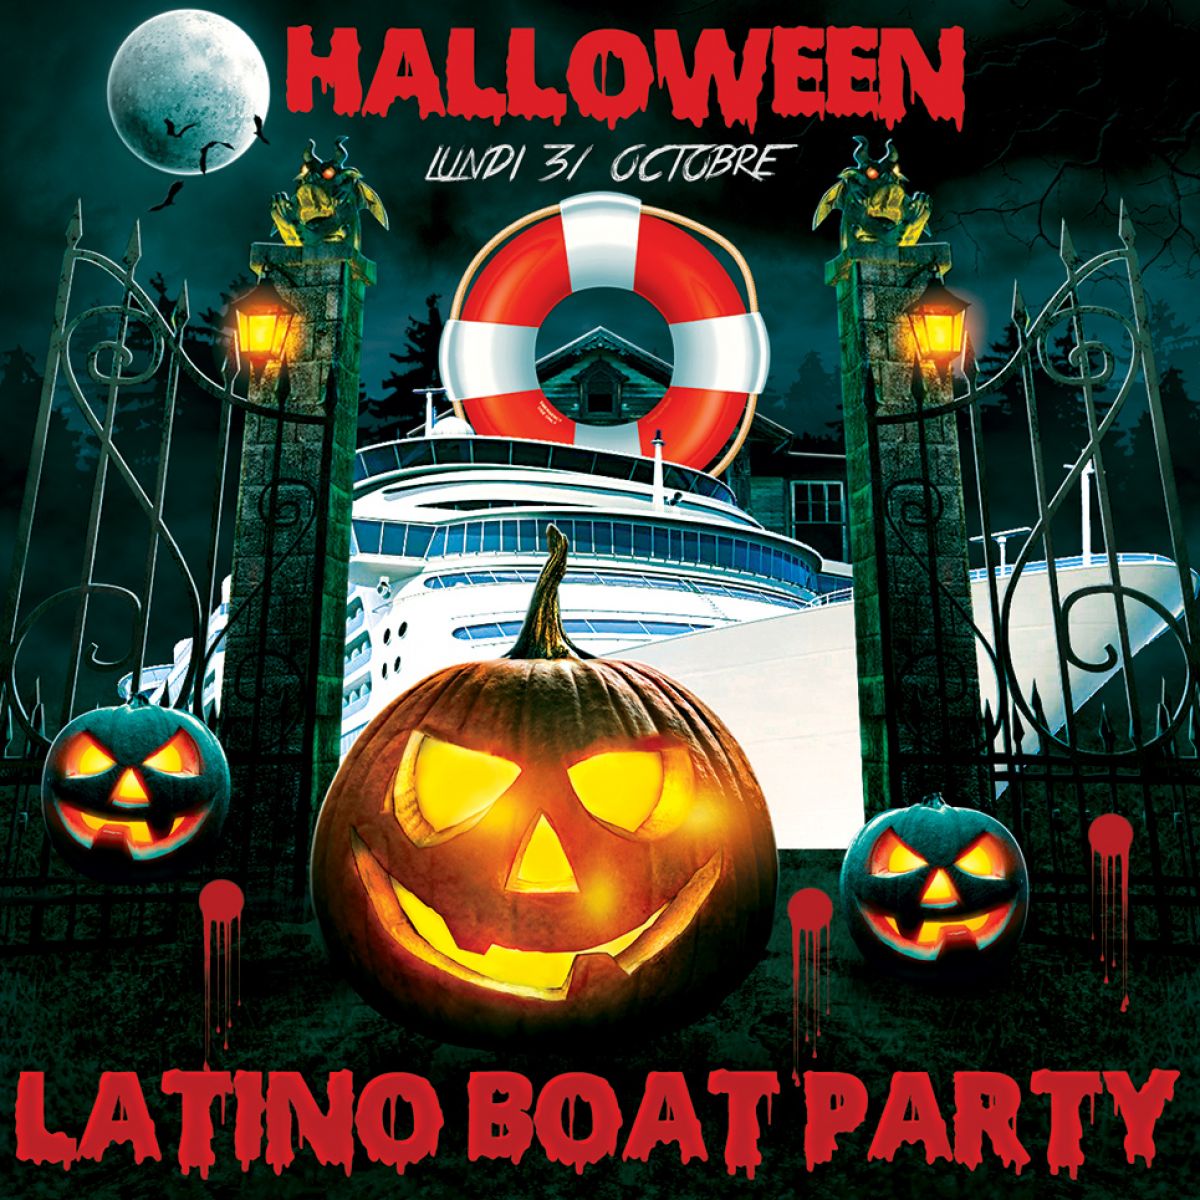 HALLOWEEN CROISIERE LATINO BOAT PARTY Placeminute